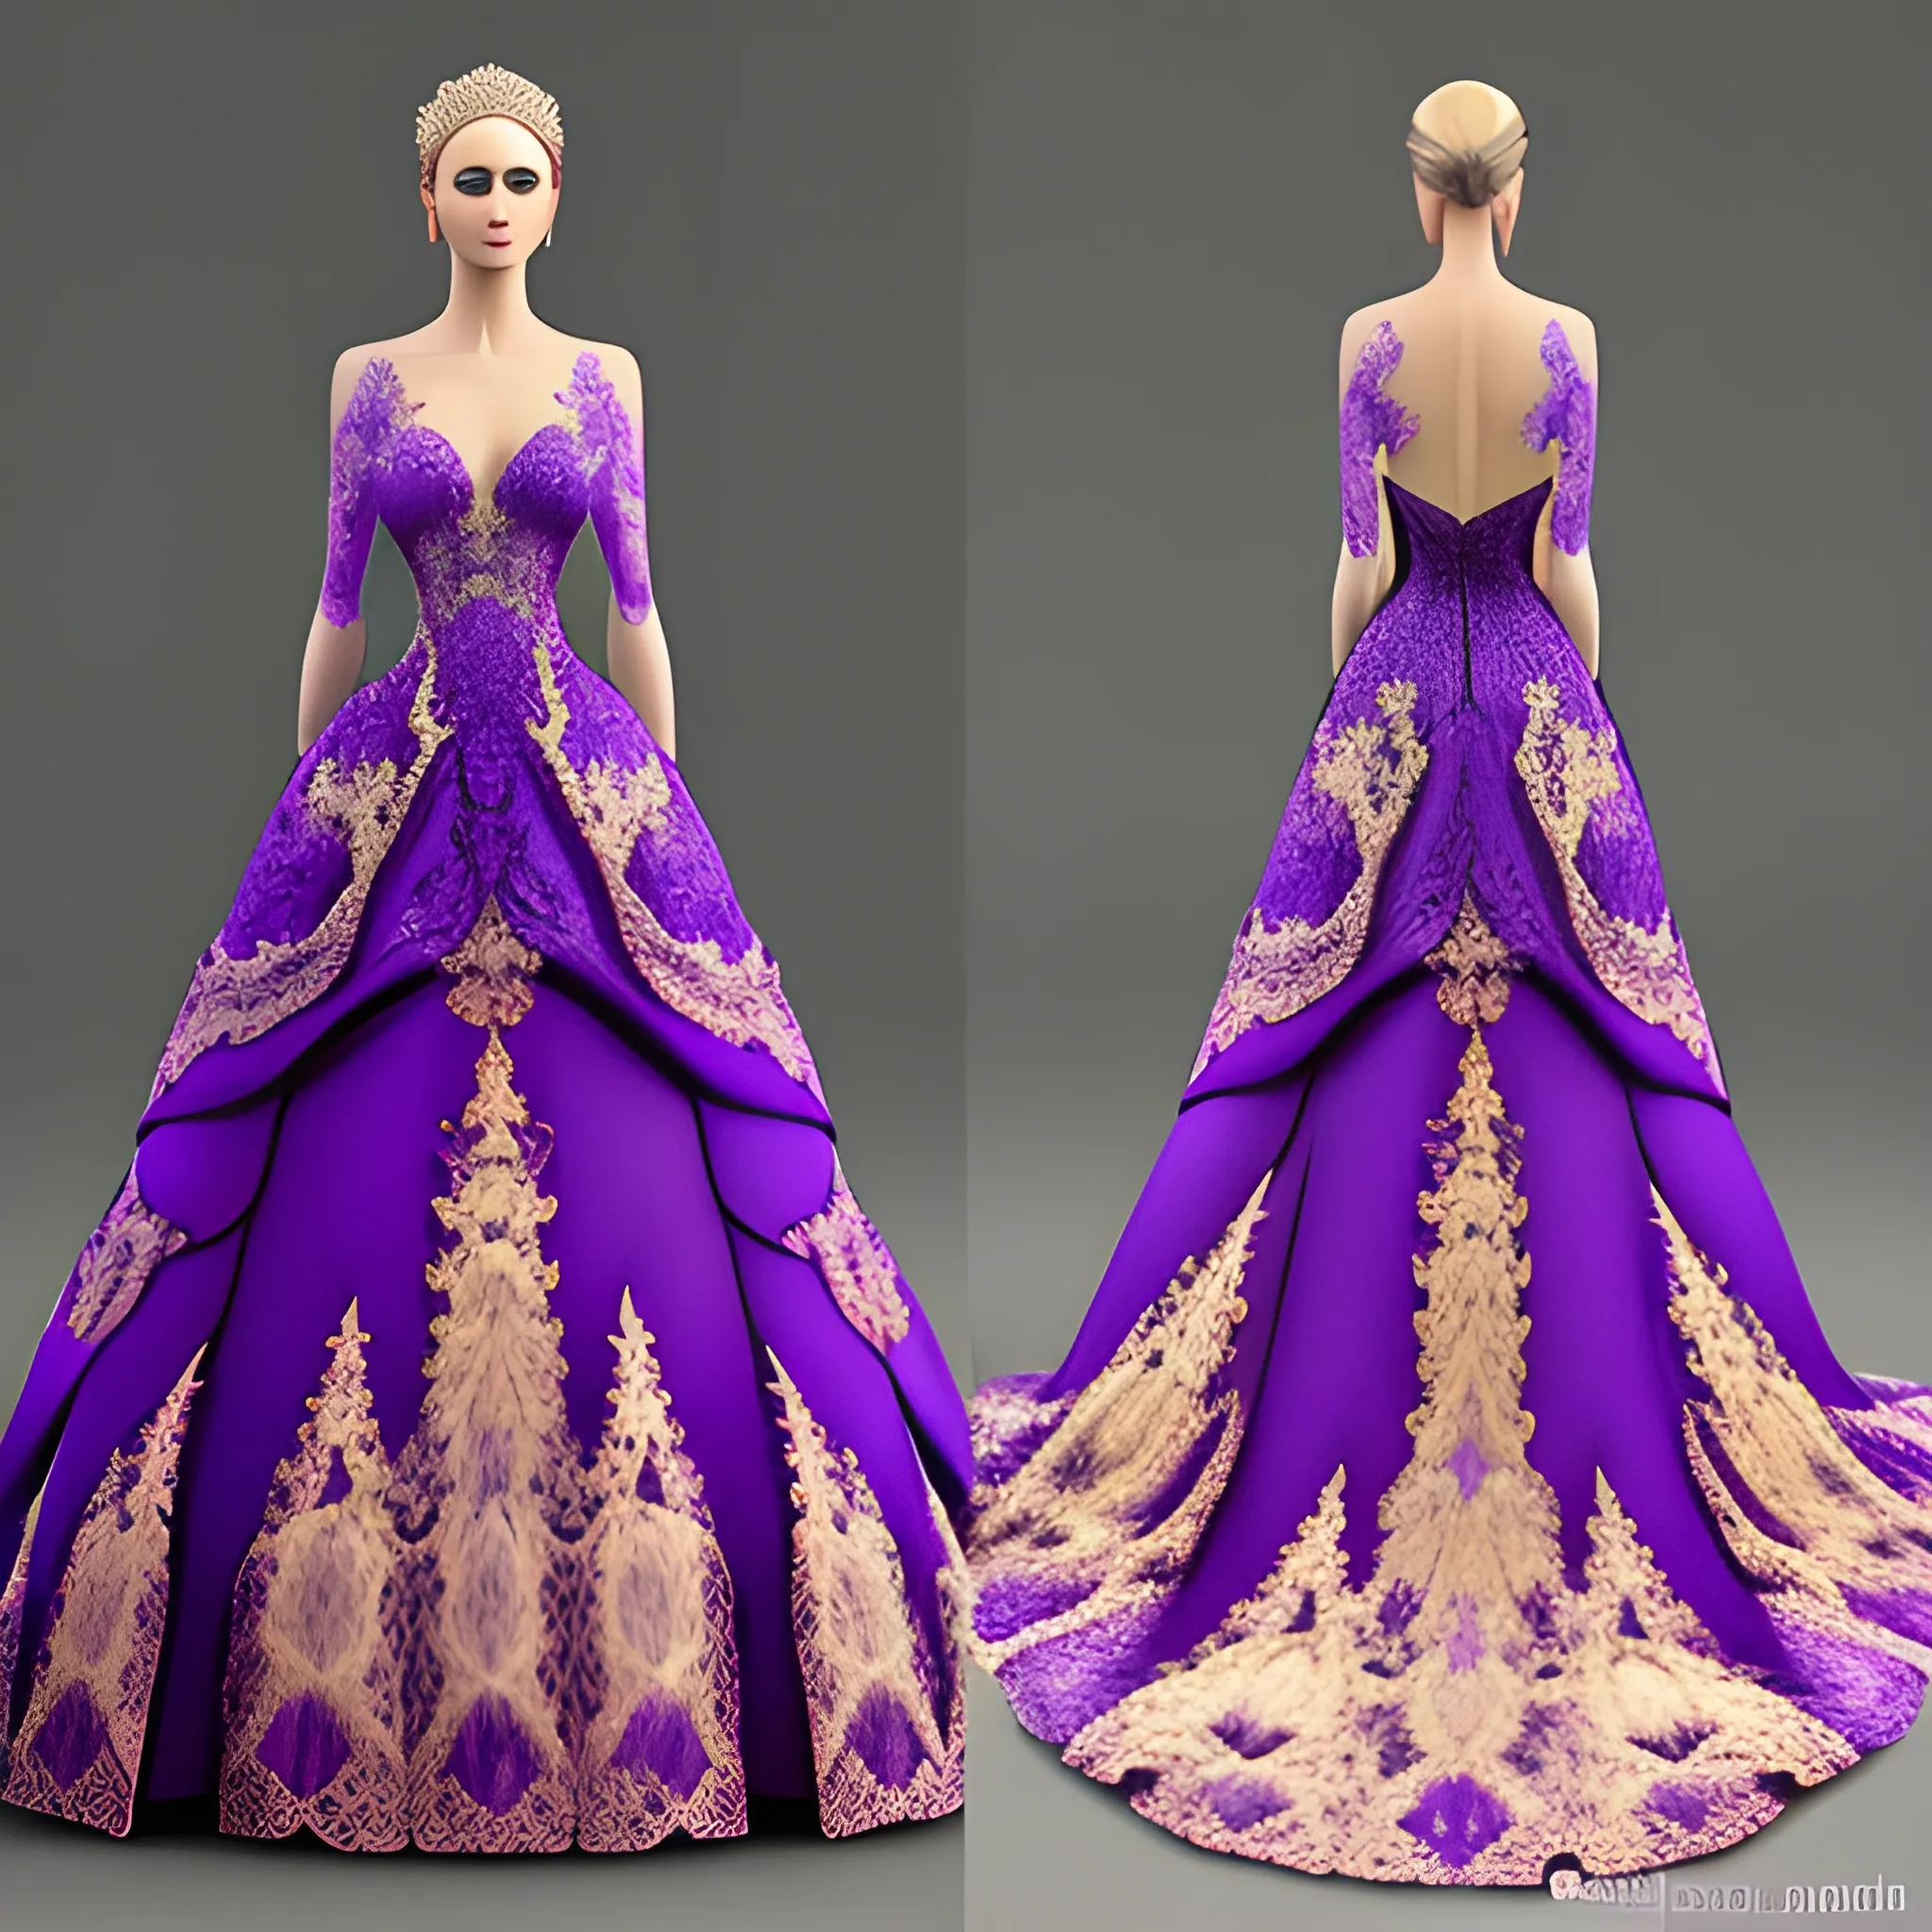 Intricate fantasy wedding gown purple and gold lace goddess dream dress, 3D, Trippy